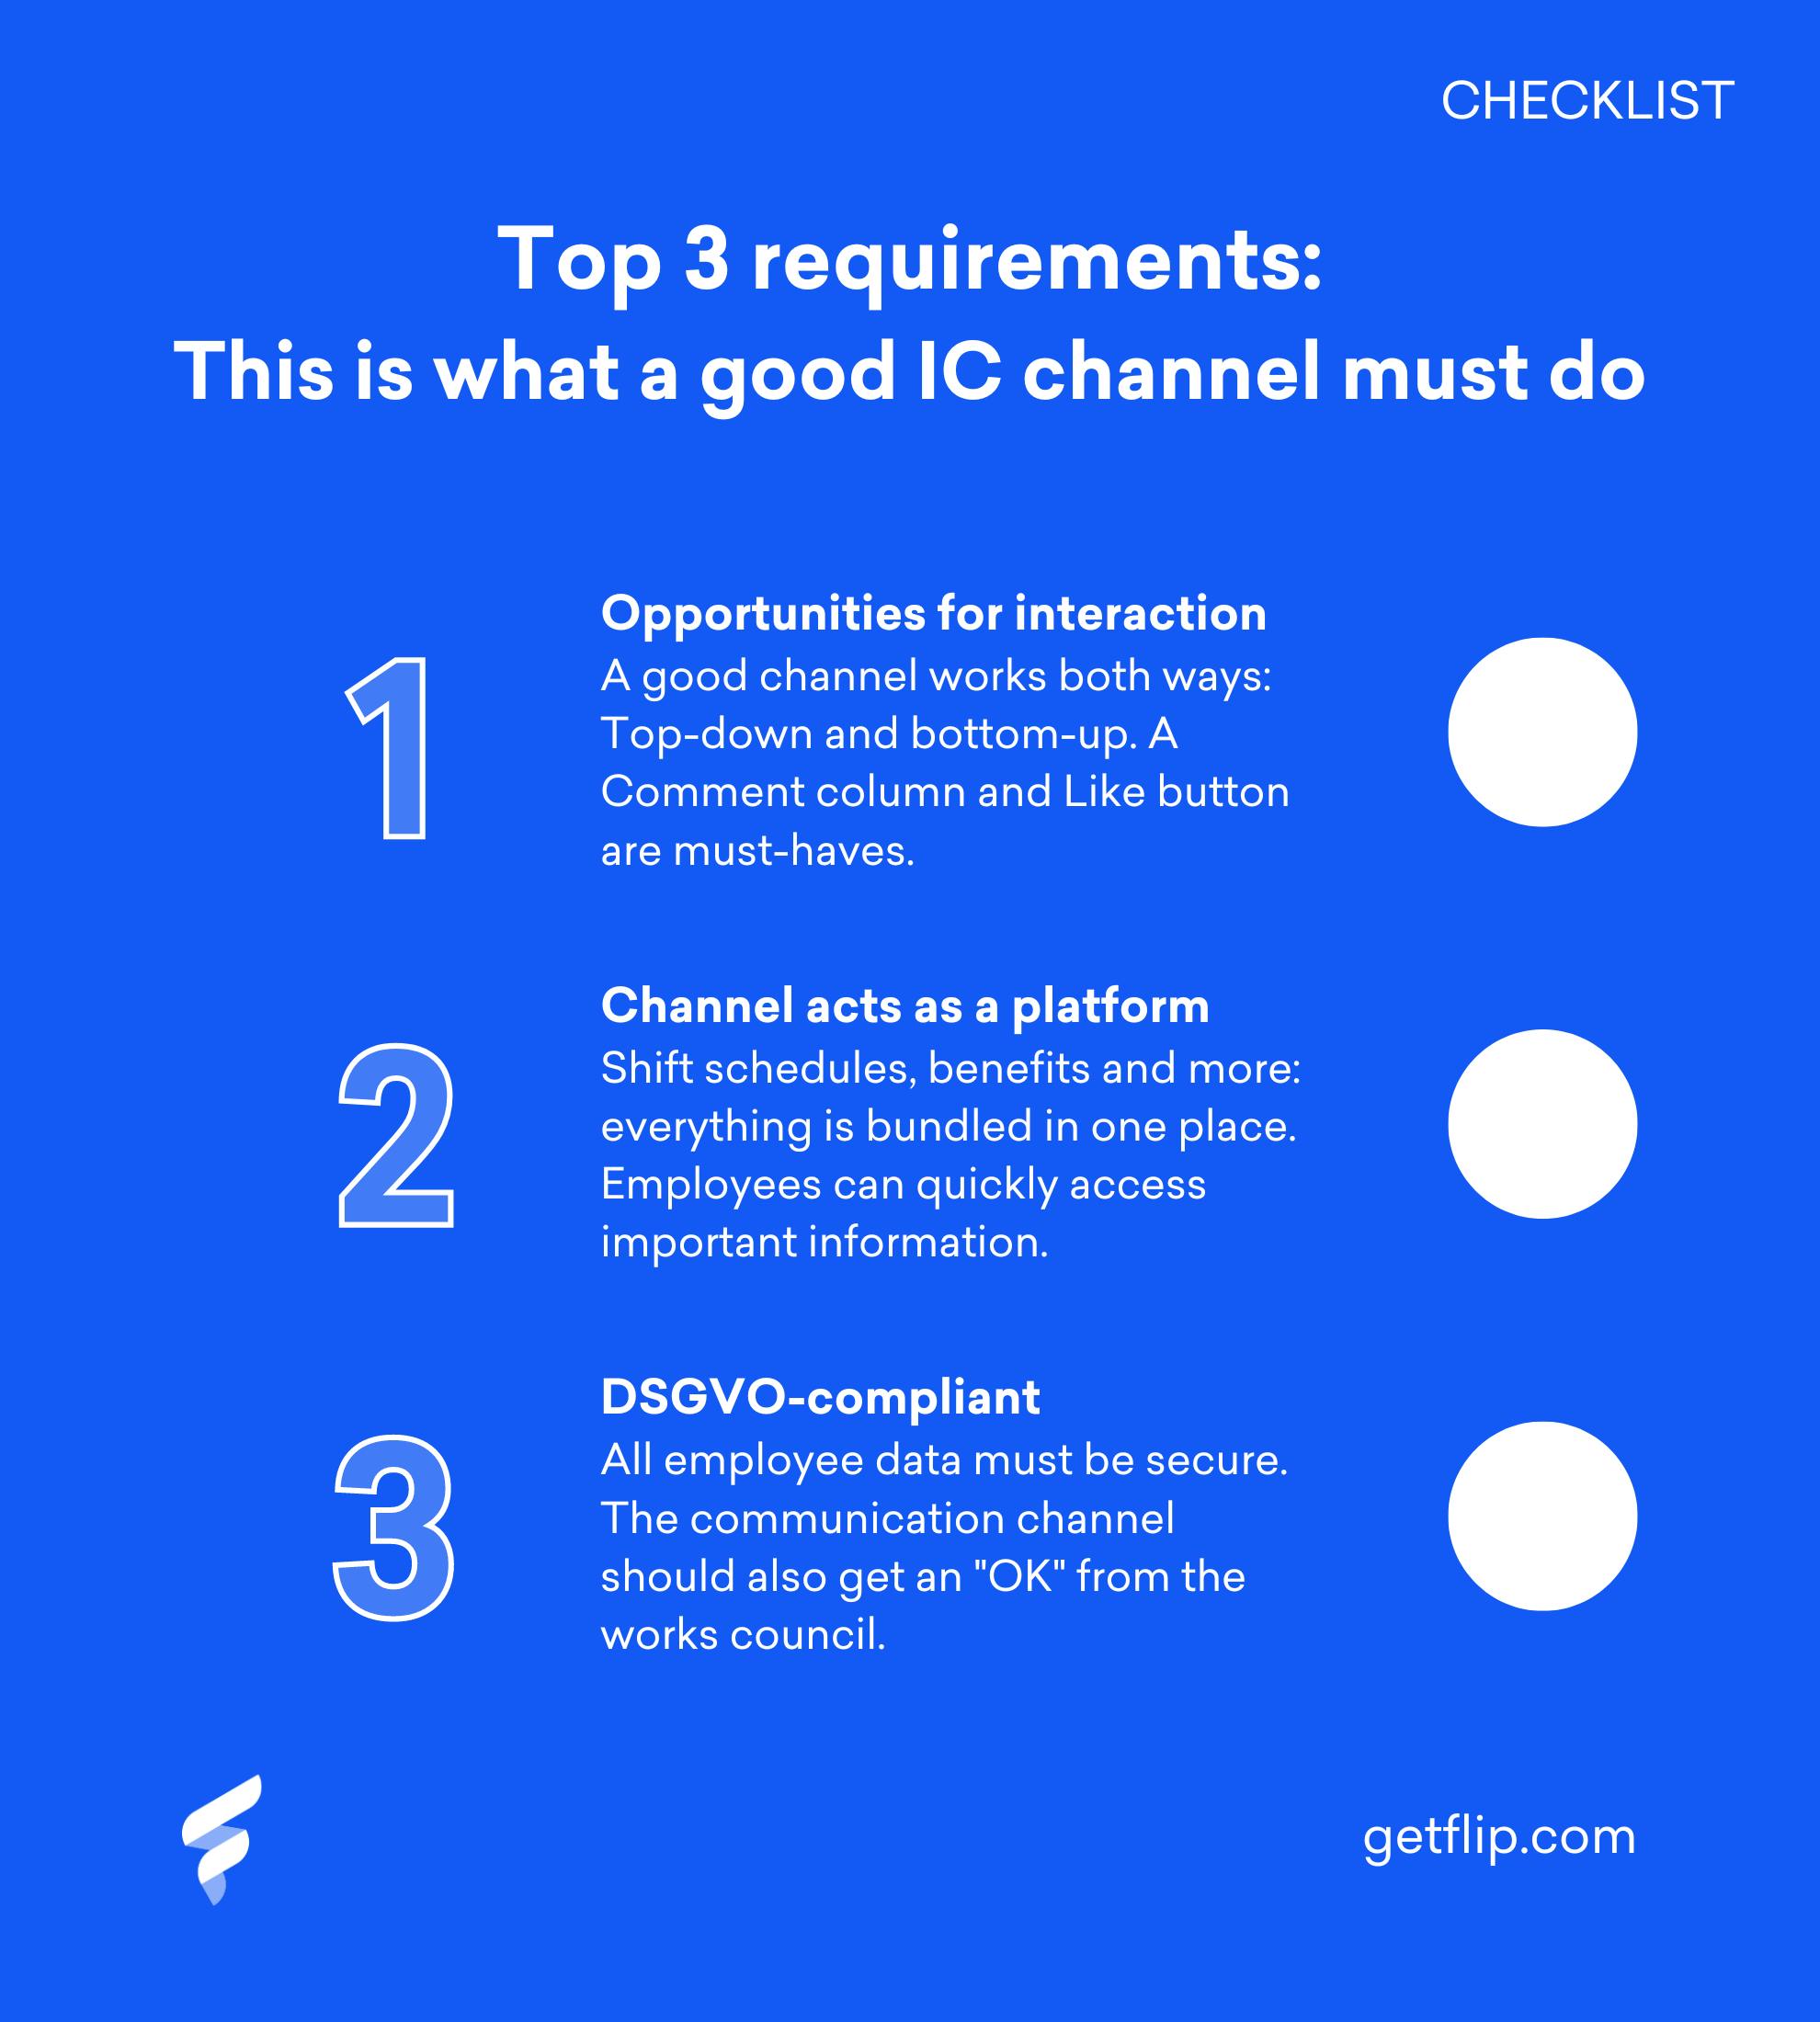 Checklist summarising the three most important requirements for a good internal communication channel